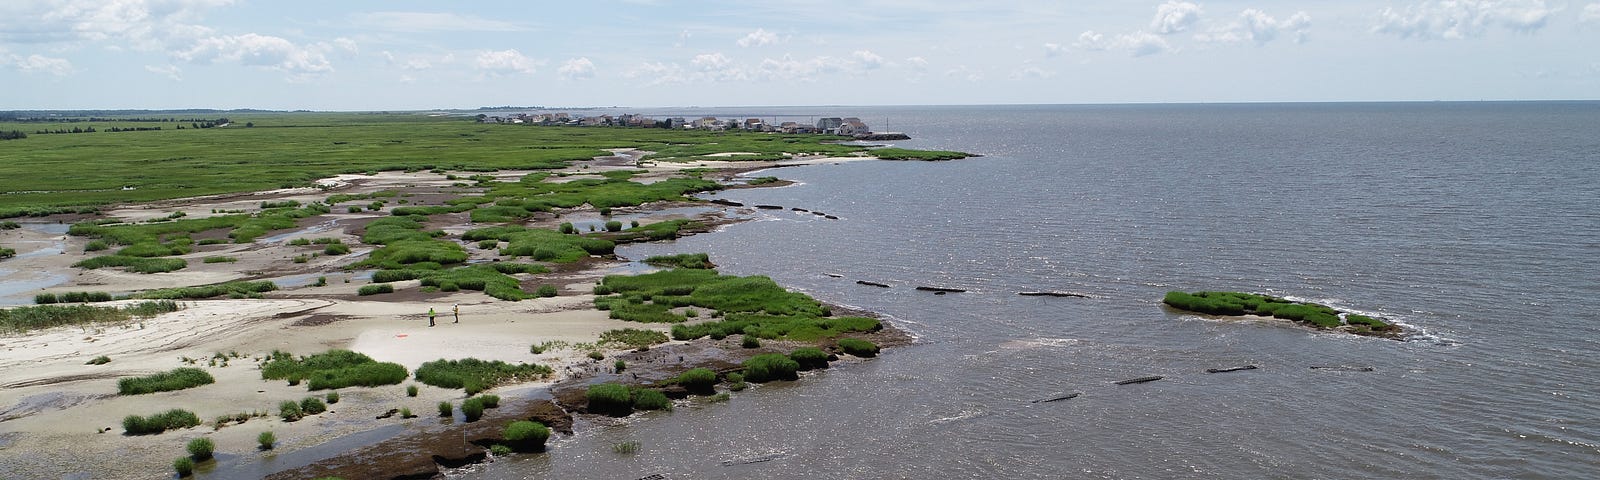 This aerial view shows the coastline with beach area and green marsh to the left. The ocean is to the right. In the water just off the sloping shoreline are breakwaters. There’s distance between each breakwater. A small peninsula no longer visibly connected to the coastline is visible. There is a row of residential structures along the water in the background.